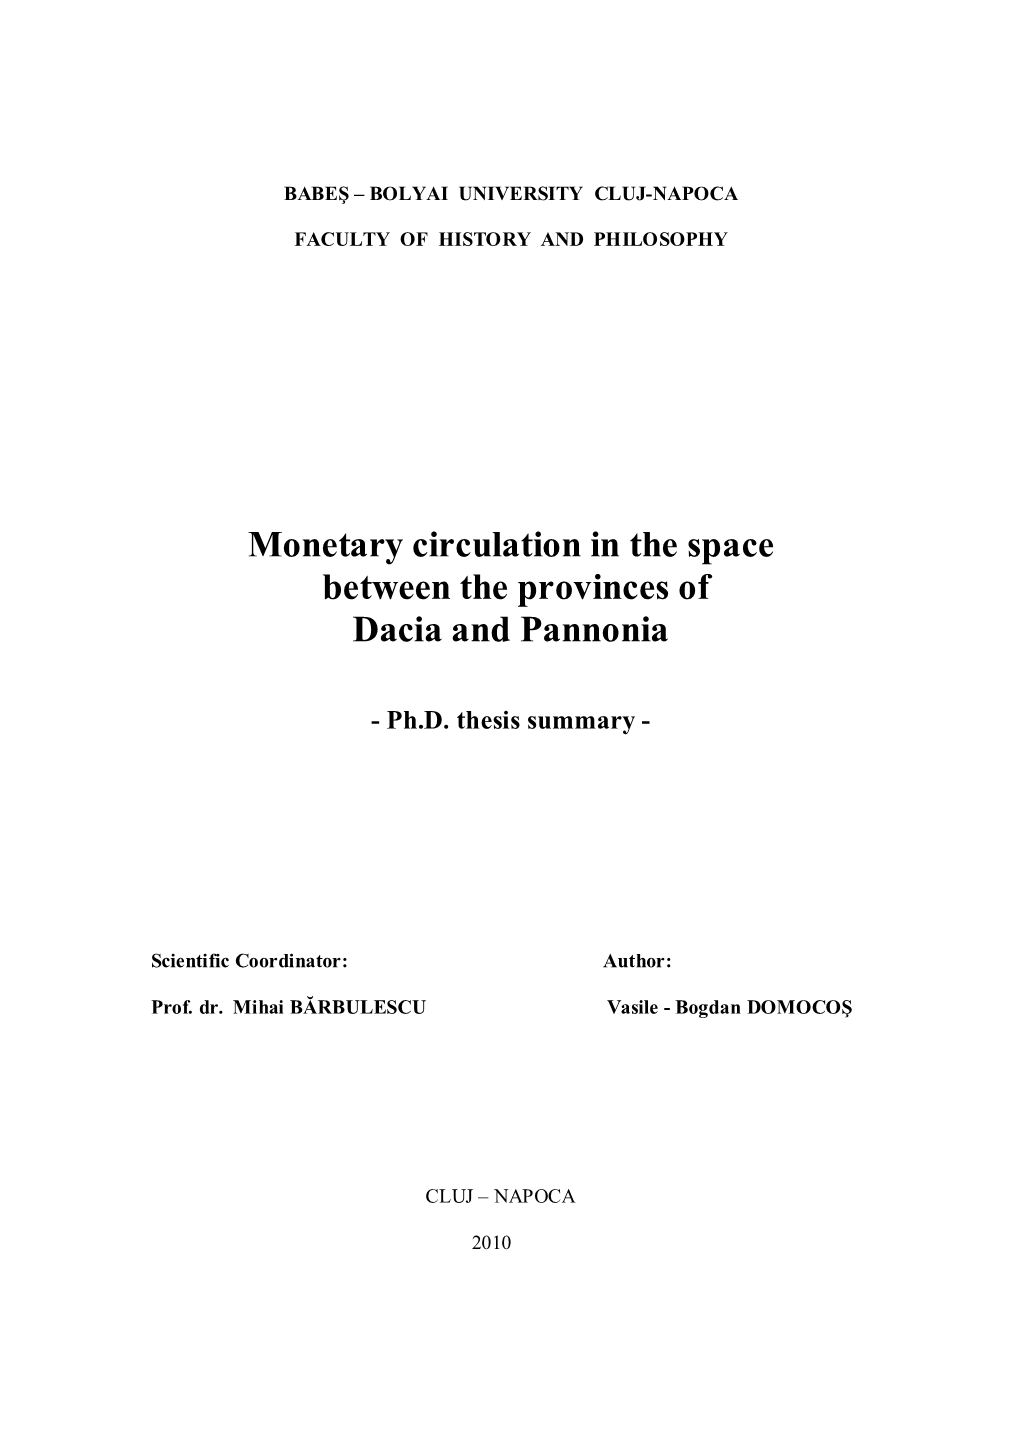 Monetary Circulation in the Space Between the Provinces of Dacia and Pannonia